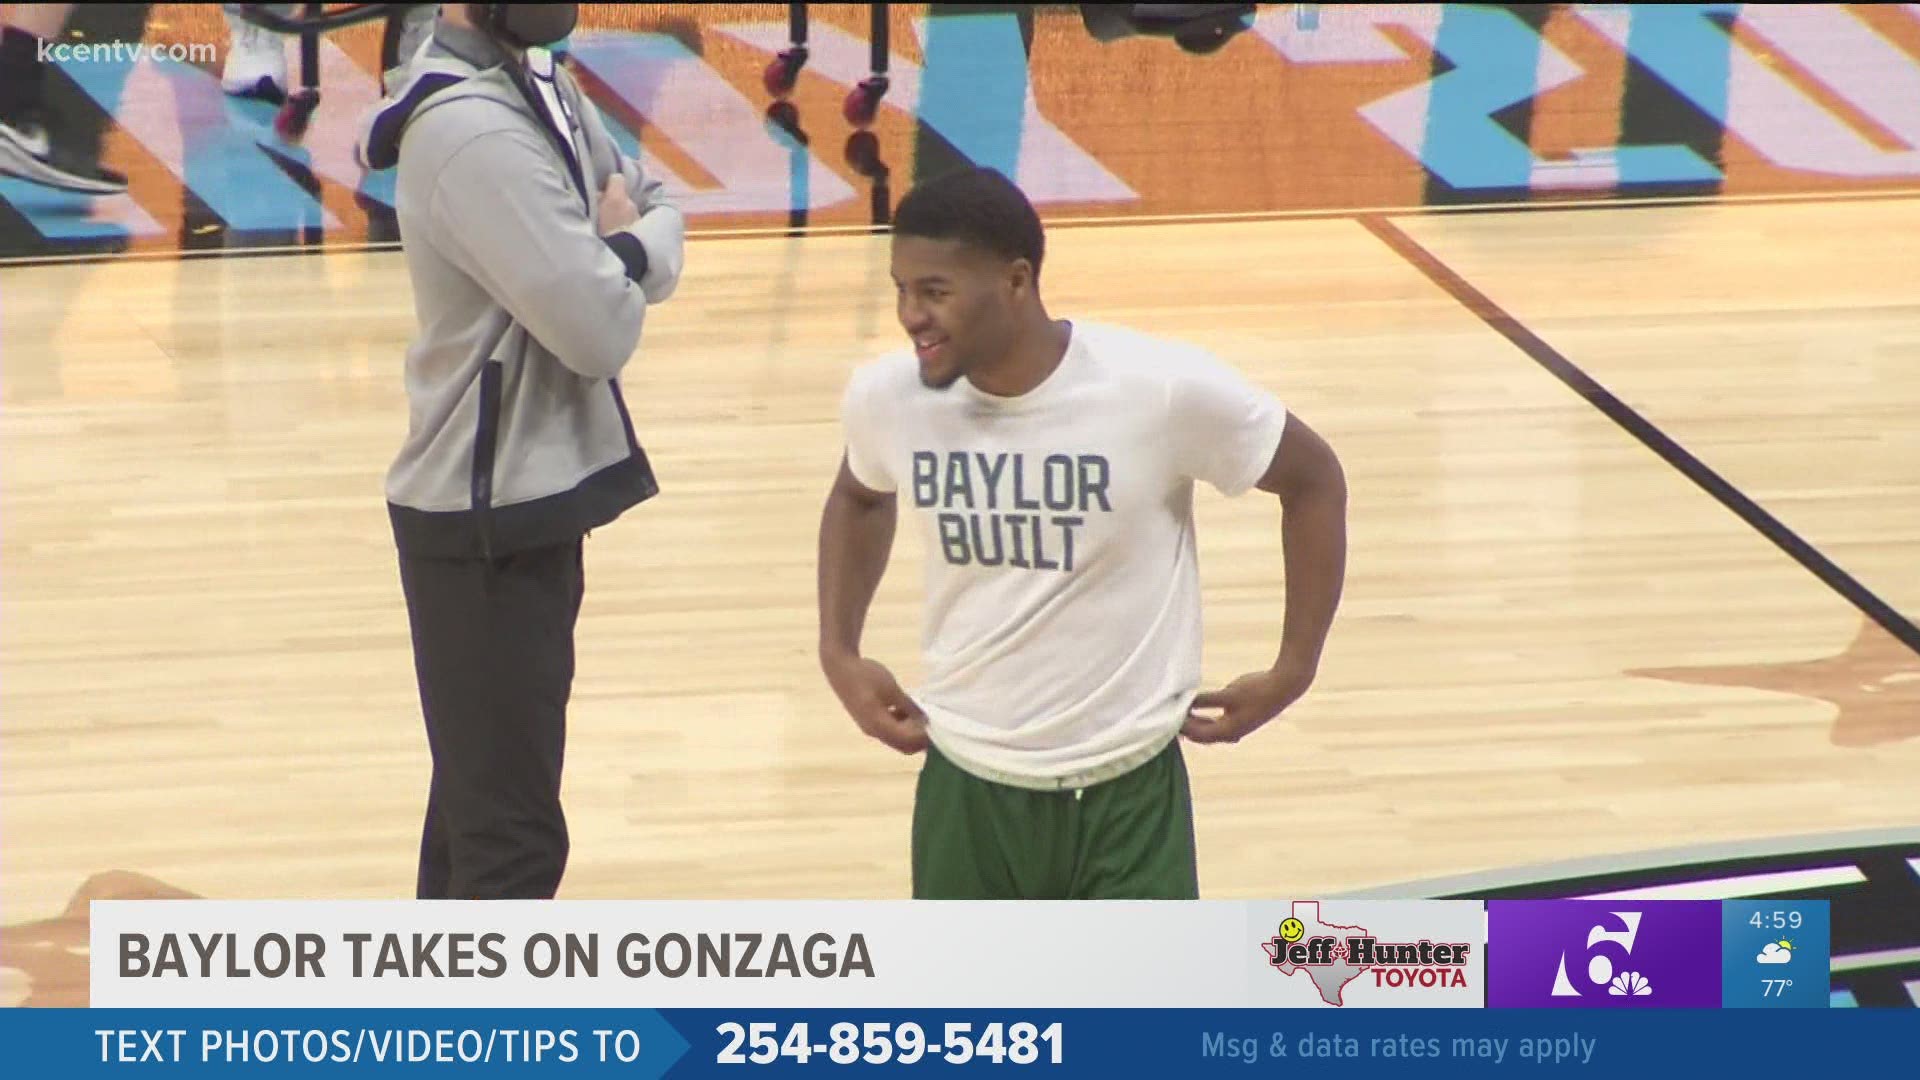 Neither Gonzaga nor Baylor have won a national championship.